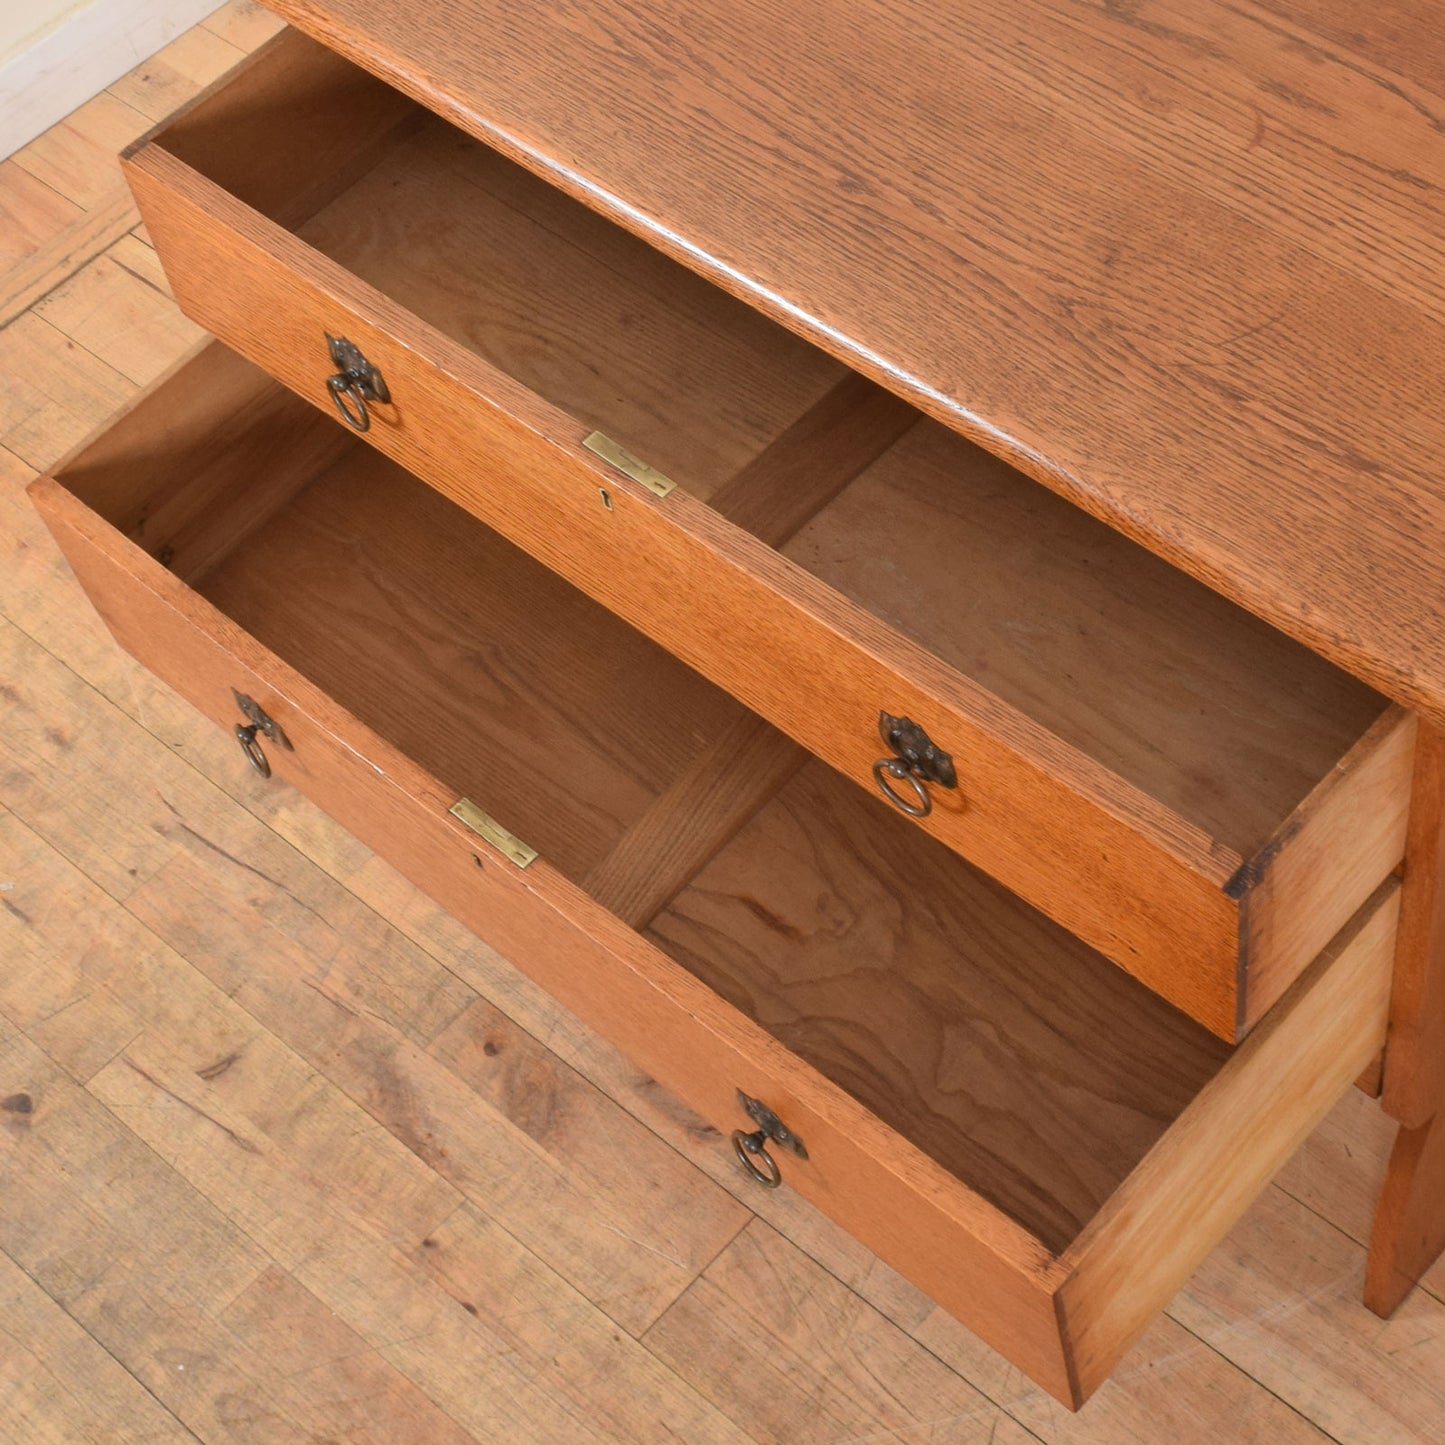 Restored Oak Chest of Drawers